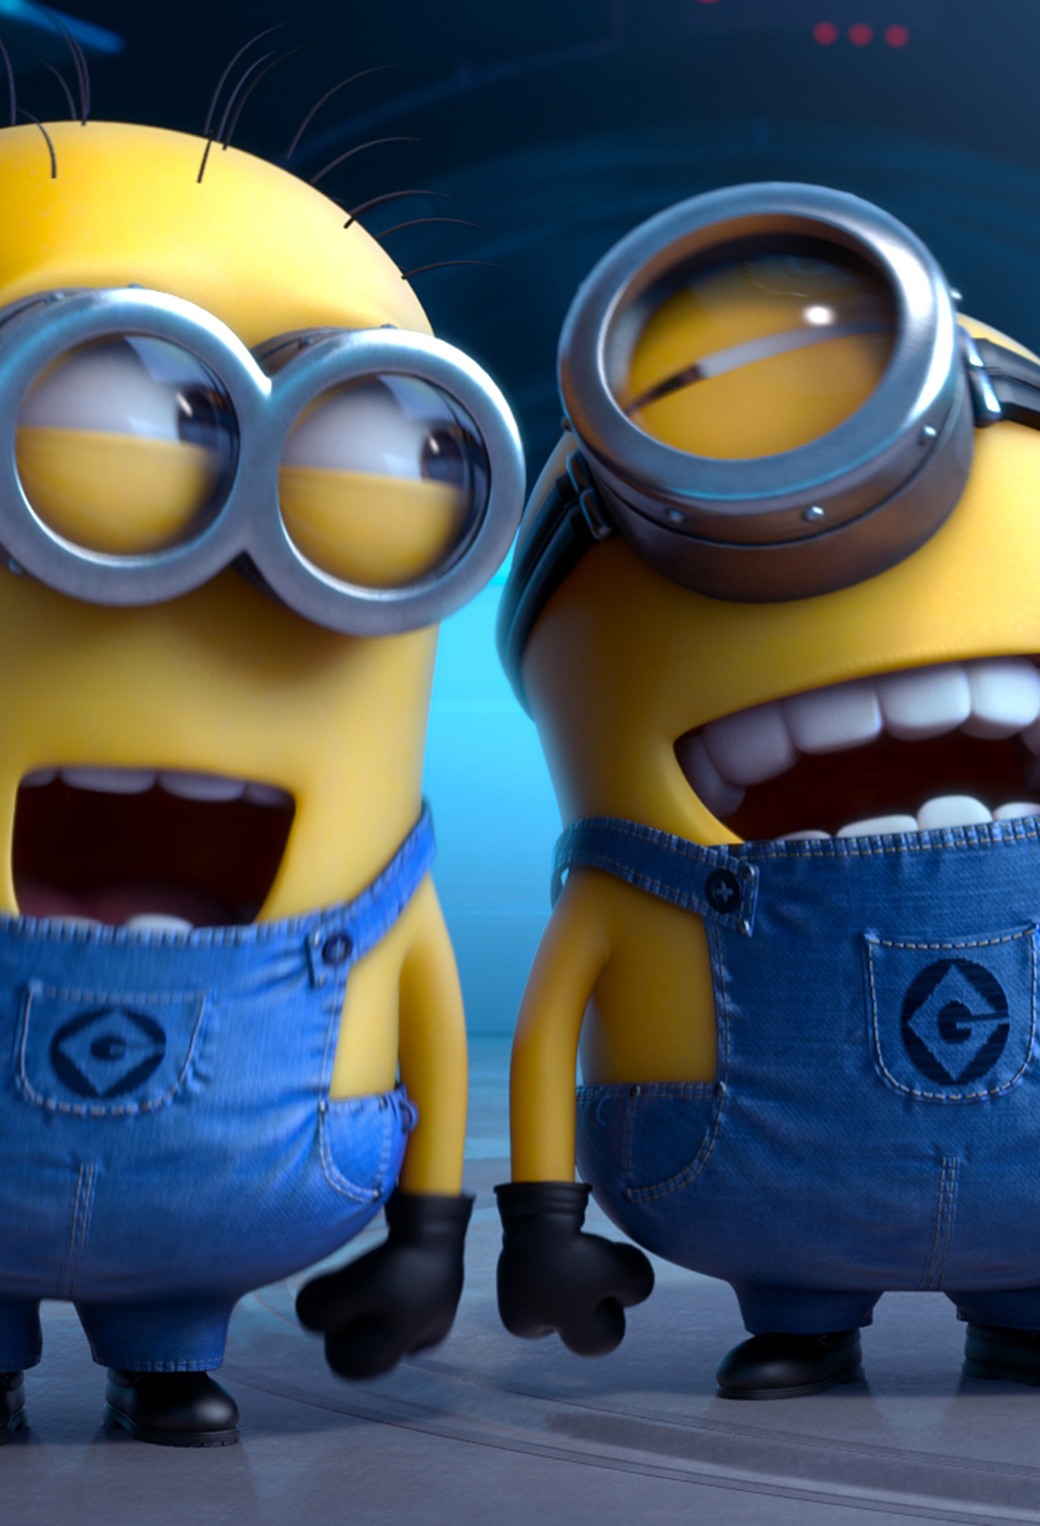 Despicable Me Laughing 3wallpaper iPhone Parallax Les Wallpaper